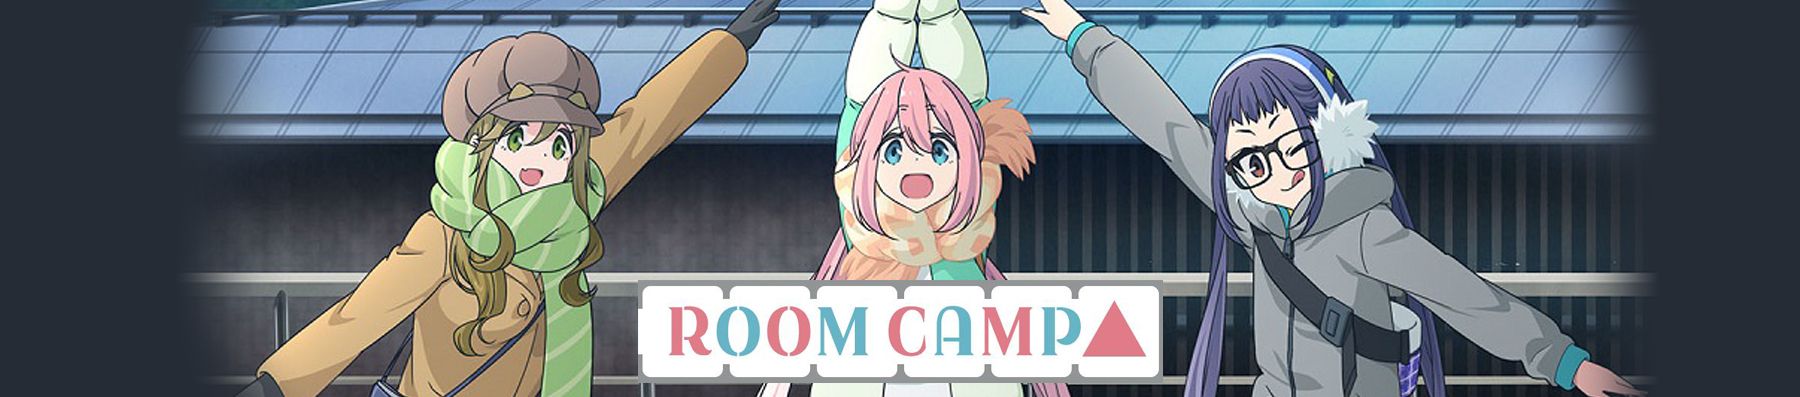 Dossier - Room Camp